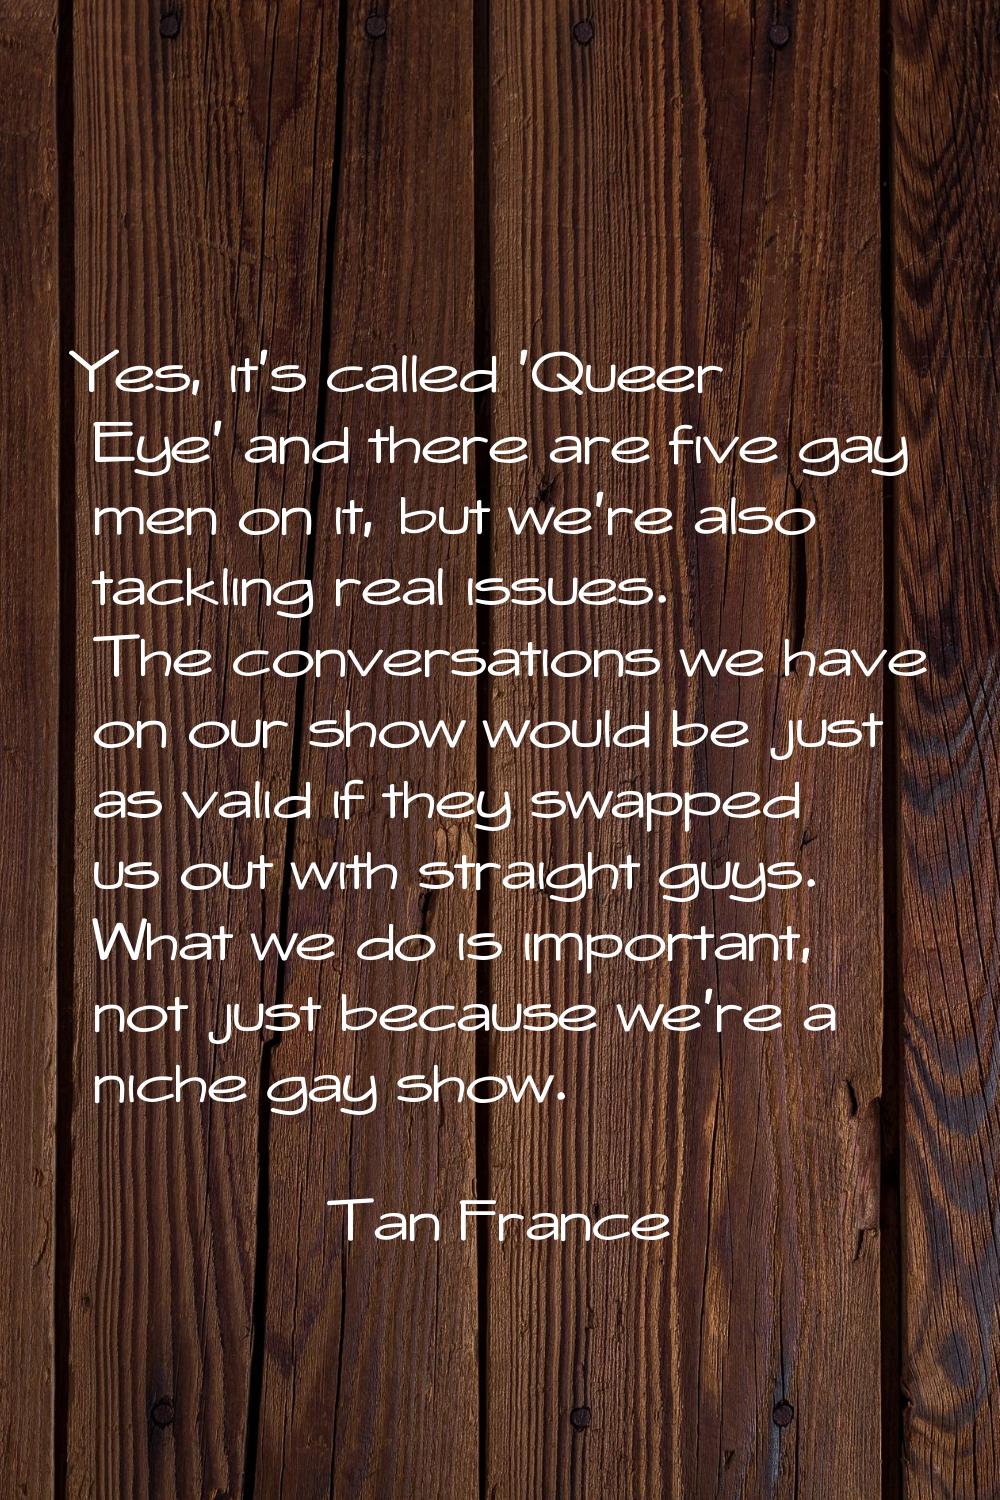 Yes, it's called 'Queer Eye' and there are five gay men on it, but we're also tackling real issues.